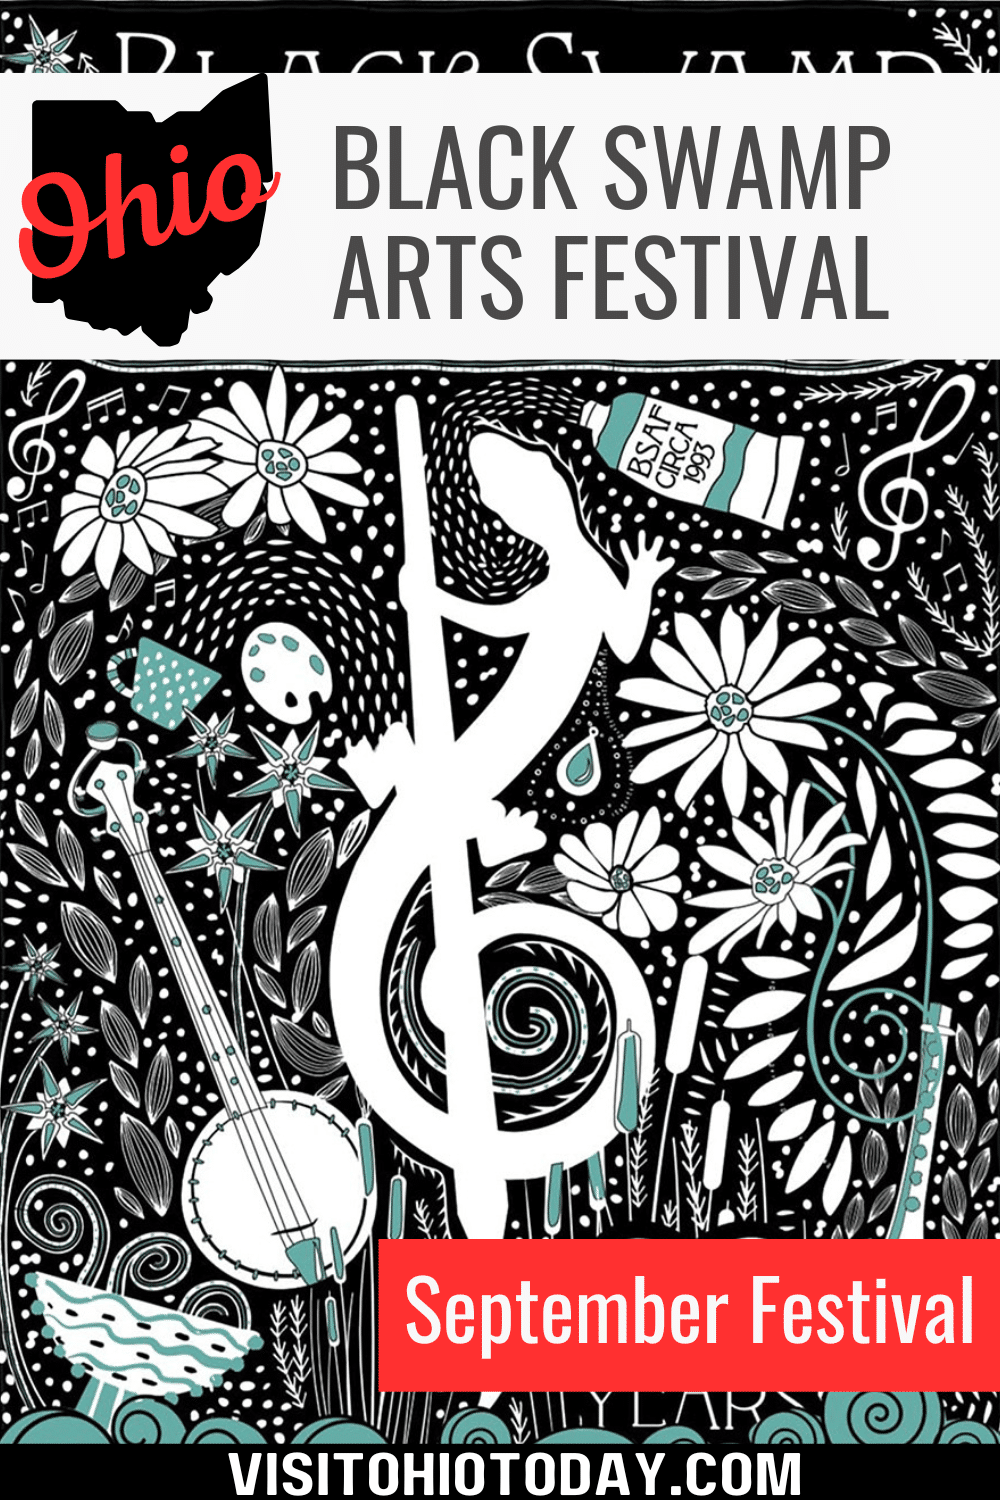 The Black Swamp Arts Festival is a free arts and live music festival held in Bowling Green on the first full weekend after Labor Day – September 8, 9, and 10, 2023.